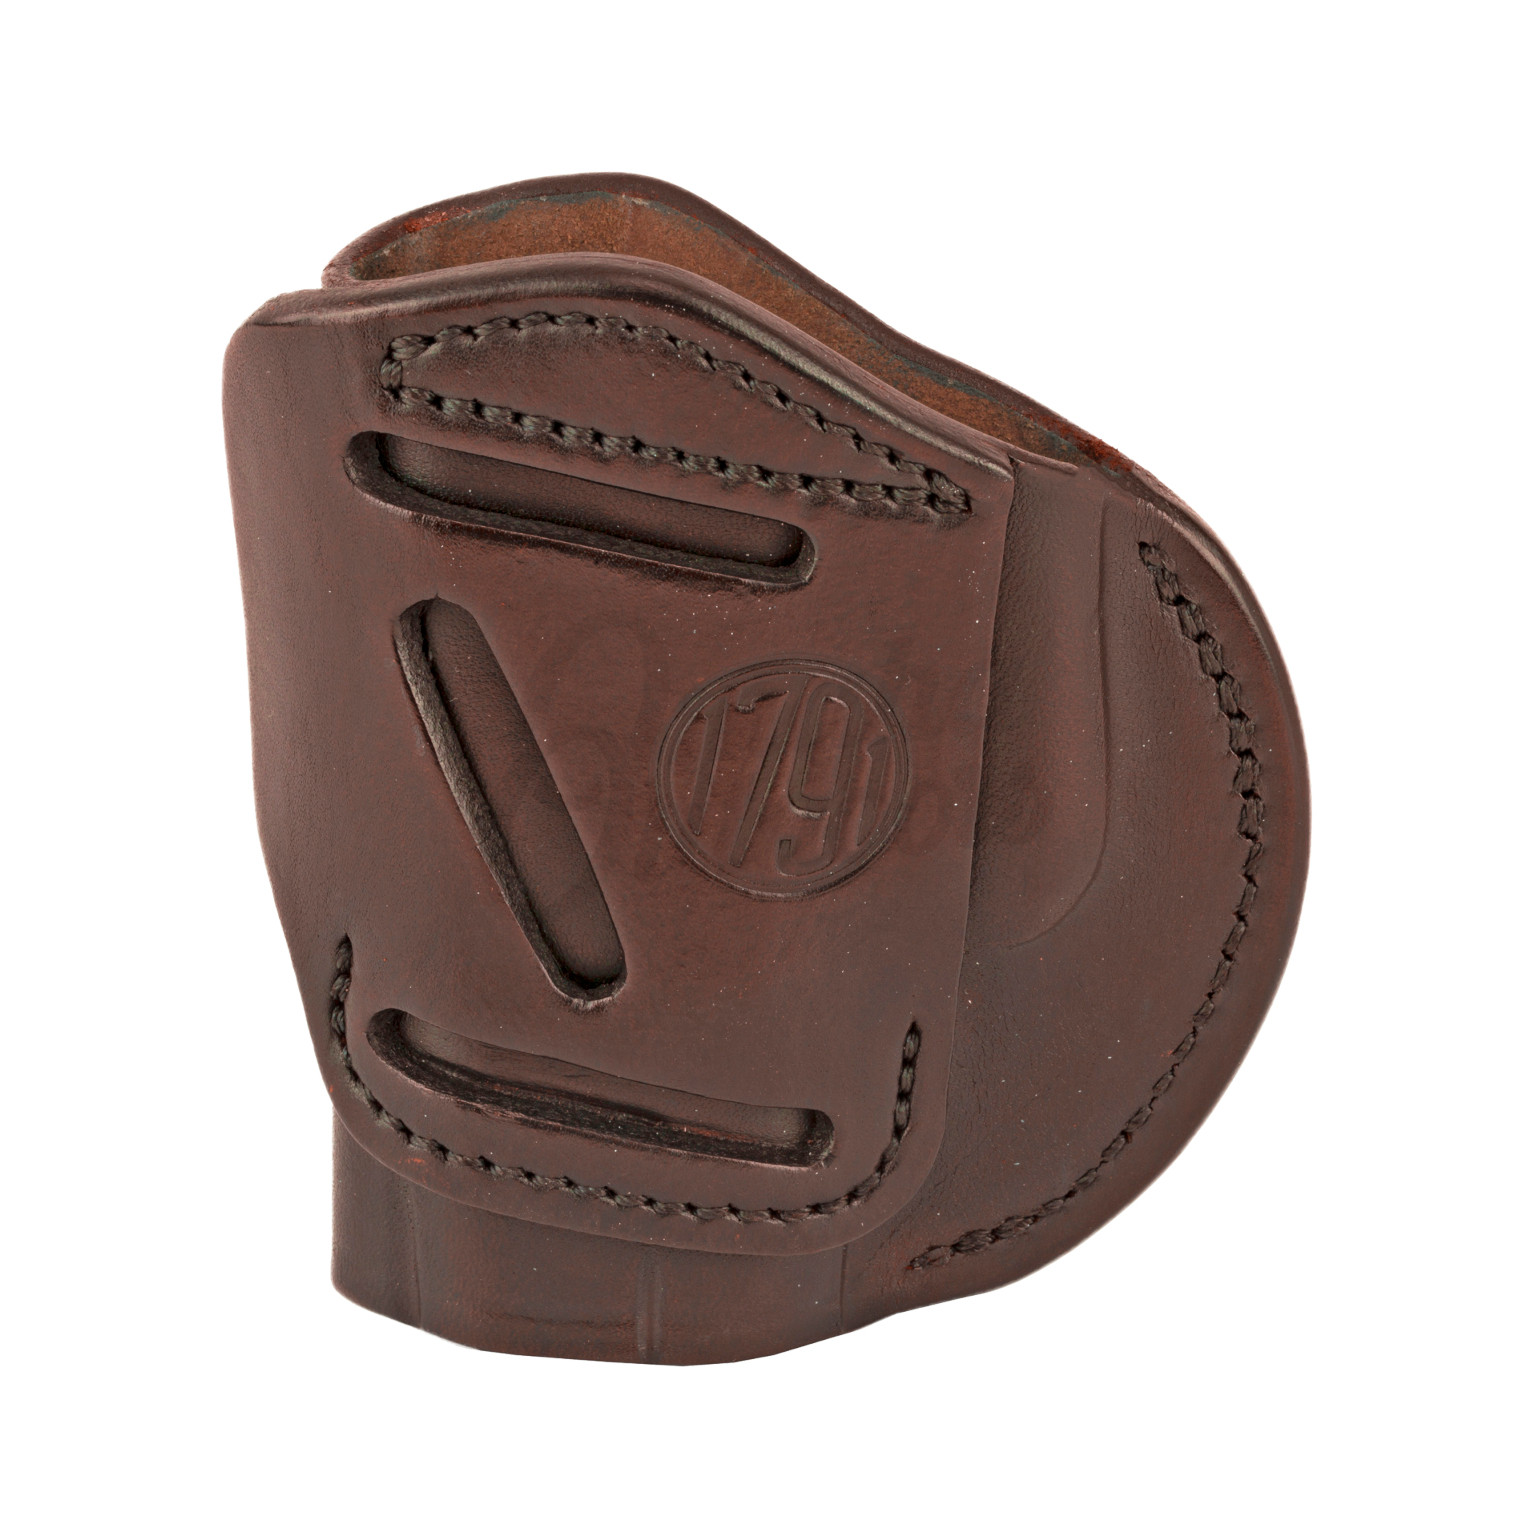 GLOCK Brown right handed leather gun holster for Glock G48 